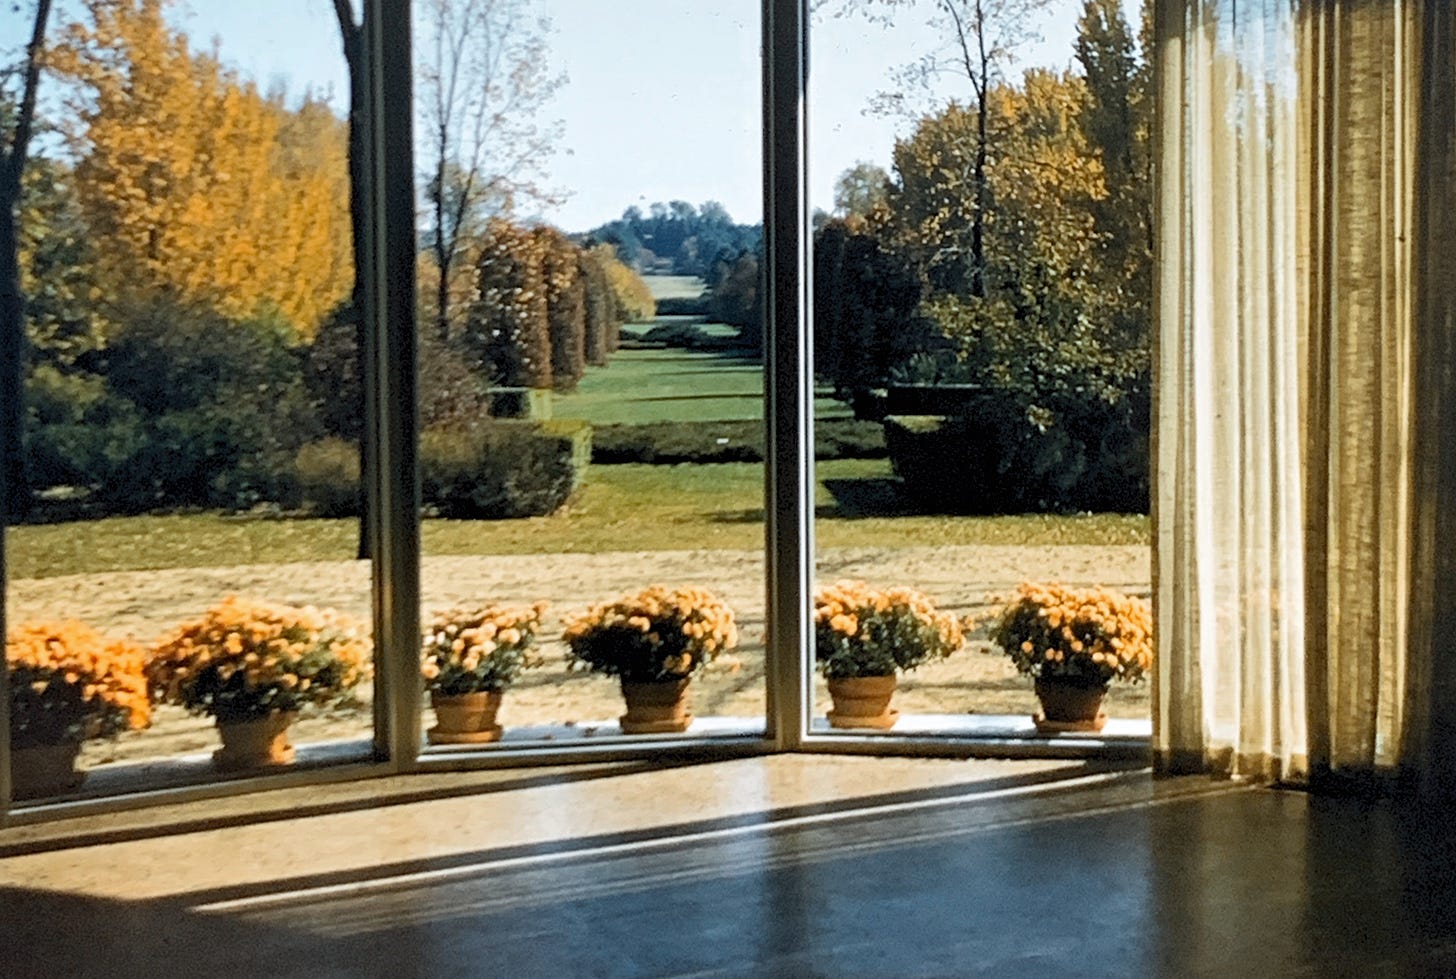 View out from inside the circular glass pavilion. Out the floor to ceiling windows is the length on the hedge garden, turning to fall color.